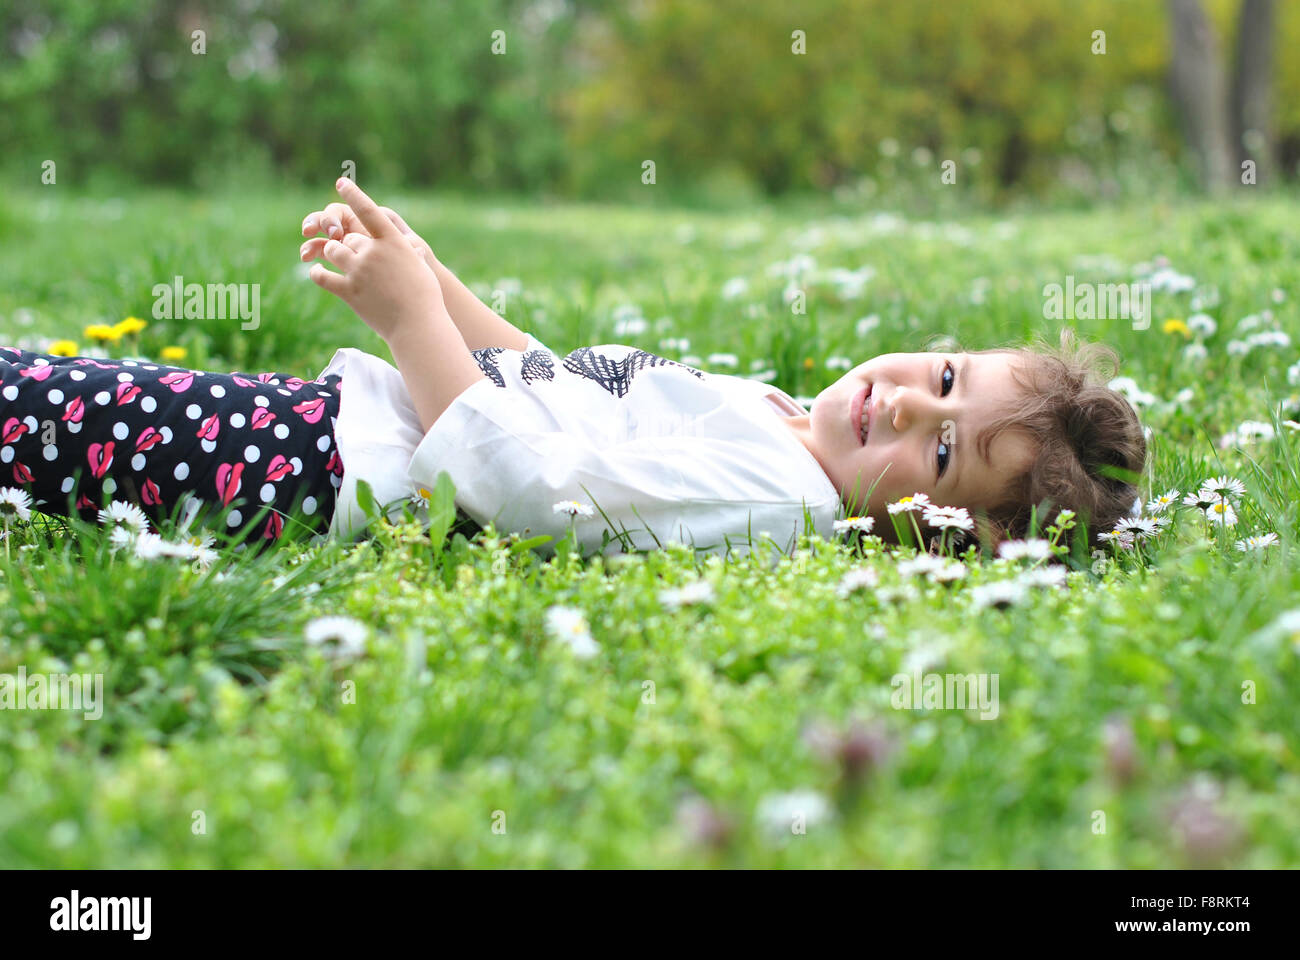 Girl lying on the grass in park Stock Photo